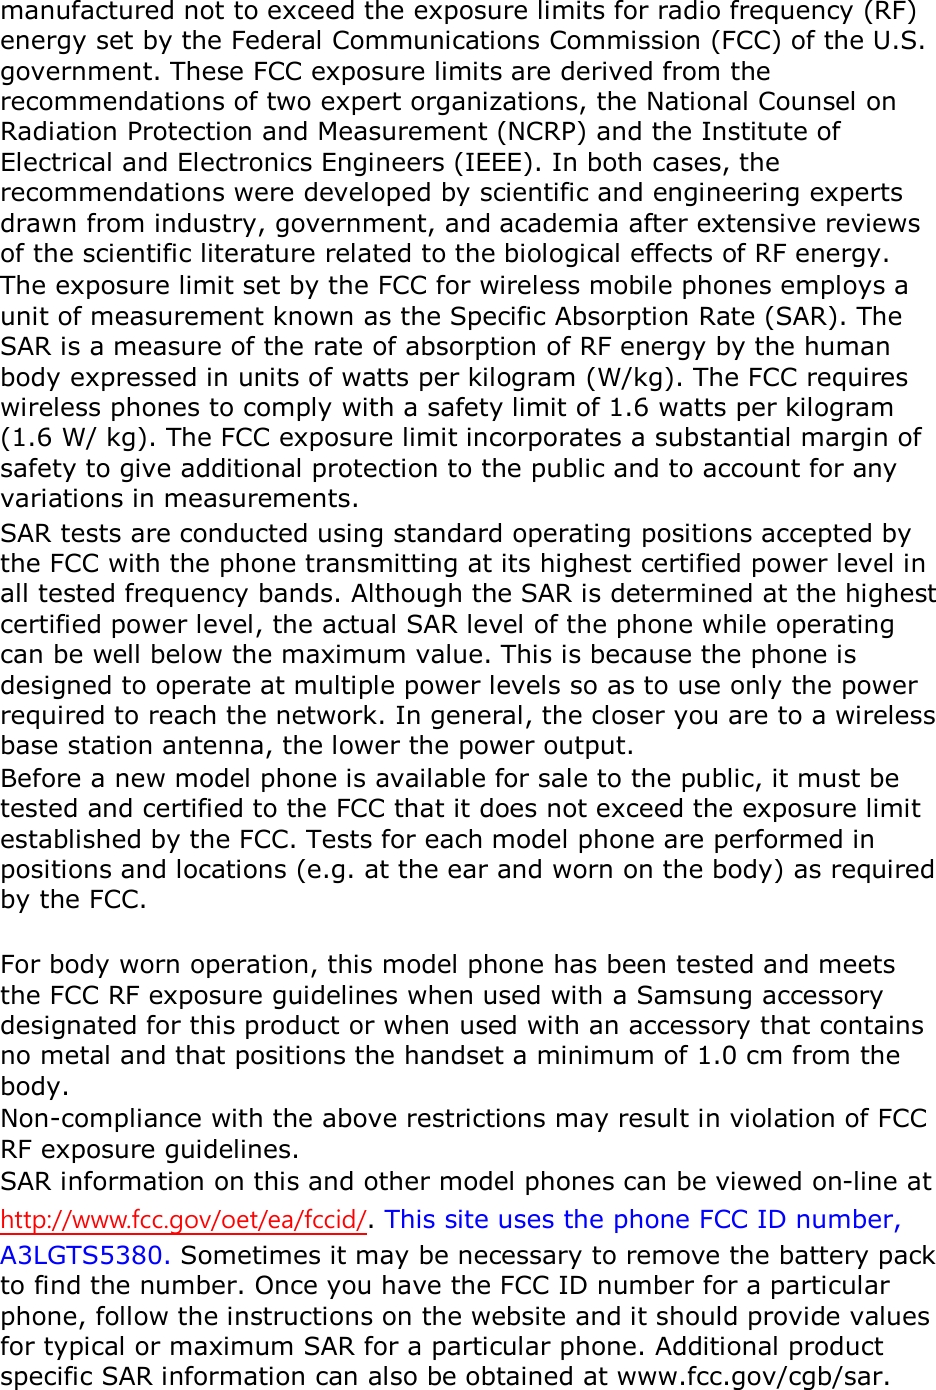 manufactured not to exceed the exposure limits for radio frequency (RF) energy set by the Federal Communications Commission (FCC) of the U.S. government. These FCC exposure limits are derived from the recommendations of two expert organizations, the National Counsel on Radiation Protection and Measurement (NCRP) and the Institute of Electrical and Electronics Engineers (IEEE). In both cases, the recommendations were developed by scientific and engineering experts drawn from industry, government, and academia after extensive reviews of the scientific literature related to the biological effects of RF energy. The exposure limit set by the FCC for wireless mobile phones employs a unit of measurement known as the Specific Absorption Rate (SAR). The SAR is a measure of the rate of absorption of RF energy by the human body expressed in units of watts per kilogram (W/kg). The FCC requires wireless phones to comply with a safety limit of 1.6 watts per kilogram (1.6 W/ kg). The FCC exposure limit incorporates a substantial margin of safety to give additional protection to the public and to account for any variations in measurements. SAR tests are conducted using standard operating positions accepted by the FCC with the phone transmitting at its highest certified power level in all tested frequency bands. Although the SAR is determined at the highest certified power level, the actual SAR level of the phone while operating can be well below the maximum value. This is because the phone is designed to operate at multiple power levels so as to use only the power required to reach the network. In general, the closer you are to a wireless base station antenna, the lower the power output. Before a new model phone is available for sale to the public, it must be tested and certified to the FCC that it does not exceed the exposure limit established by the FCC. Tests for each model phone are performed in positions and locations (e.g. at the ear and worn on the body) as required by the FCC.      For body worn operation, this model phone has been tested and meets the FCC RF exposure guidelines when used with a Samsung accessory designated for this product or when used with an accessory that contains no metal and that positions the handset a minimum of 1.0 cm from the body.   Non-compliance with the above restrictions may result in violation of FCC RF exposure guidelines. SAR information on this and other model phones can be viewed on-line at http://www.fcc.gov/oet/ea/fccid/. This site uses the phone FCC ID number, A3LGTS5380. Sometimes it may be necessary to remove the battery pack to find the number. Once you have the FCC ID number for a particular phone, follow the instructions on the website and it should provide values for typical or maximum SAR for a particular phone. Additional product specific SAR information can also be obtained at www.fcc.gov/cgb/sar. 